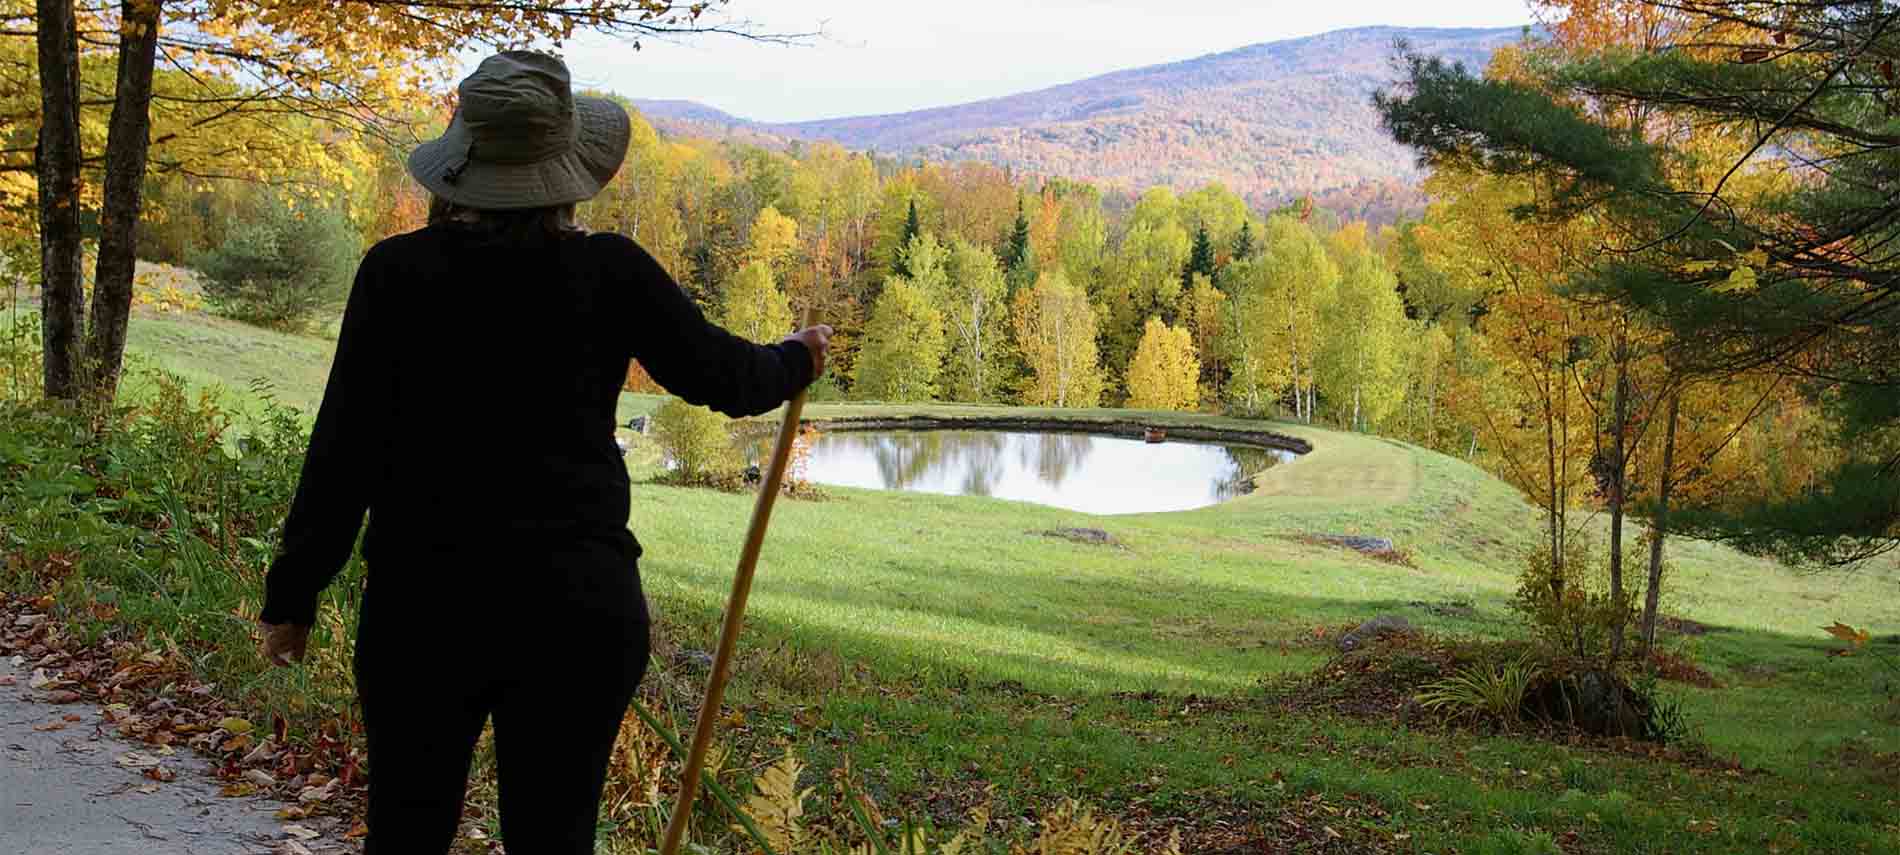 A woman with her walking stick gazing upon a small pond in a field adjascent to hiking path.